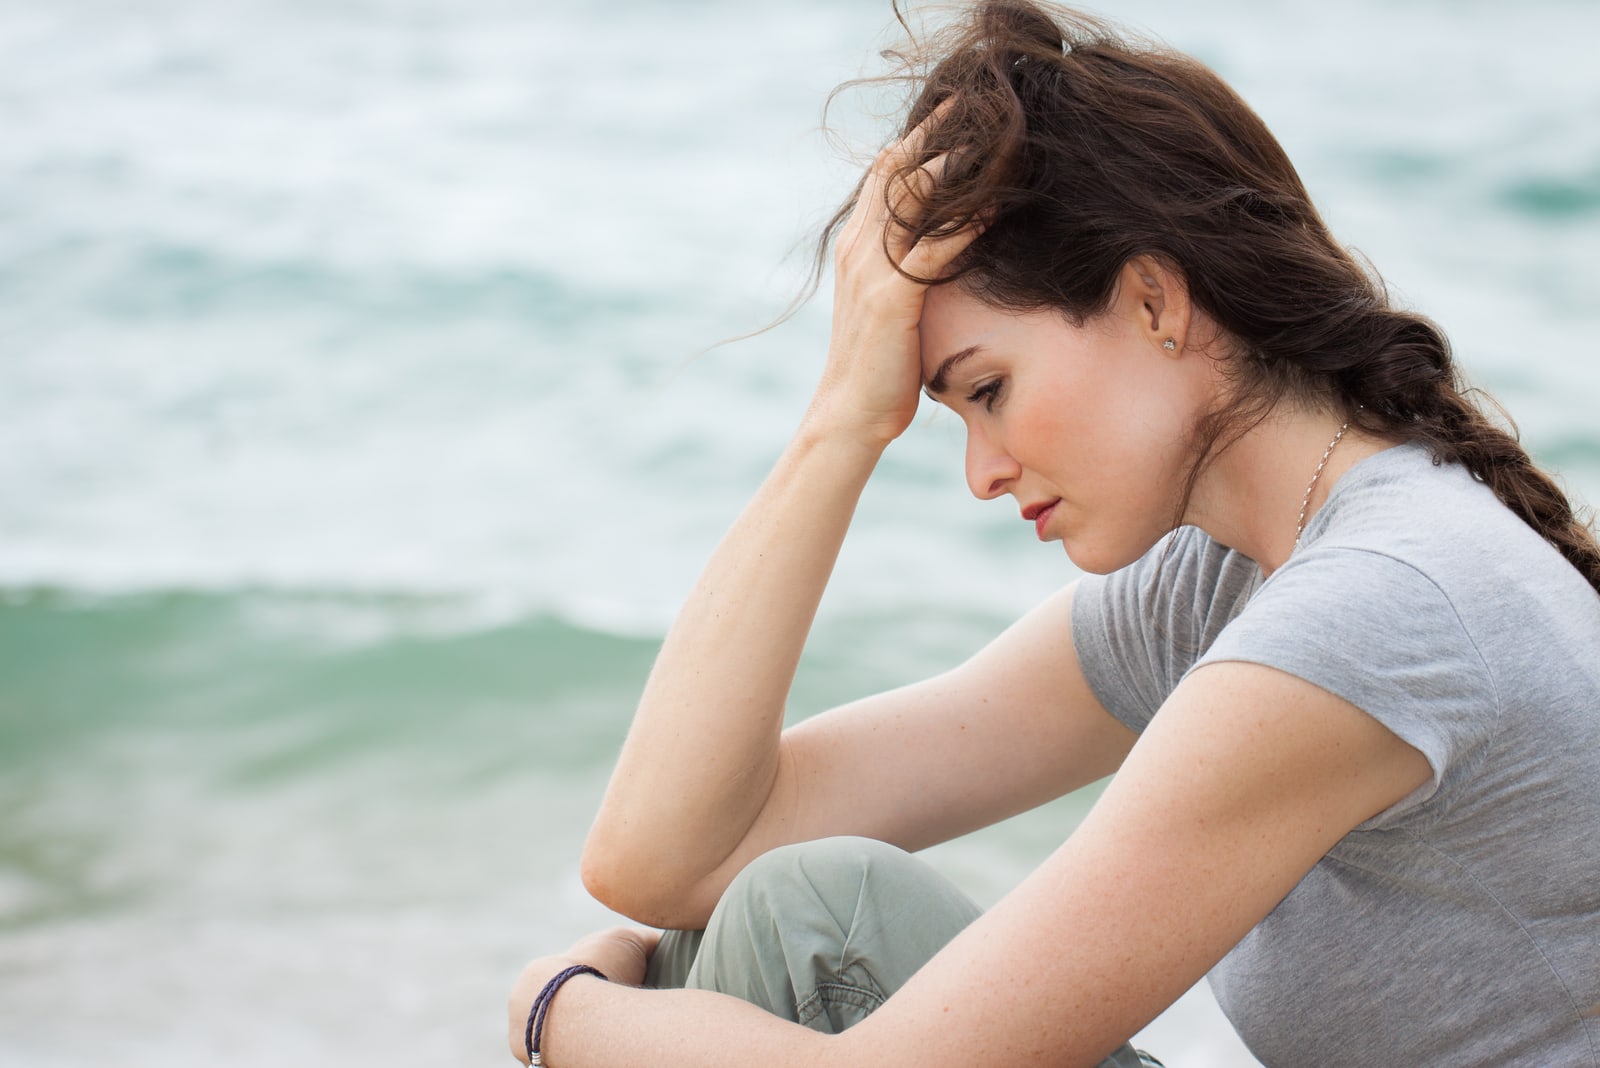 sad and worried woman sitting on the beach